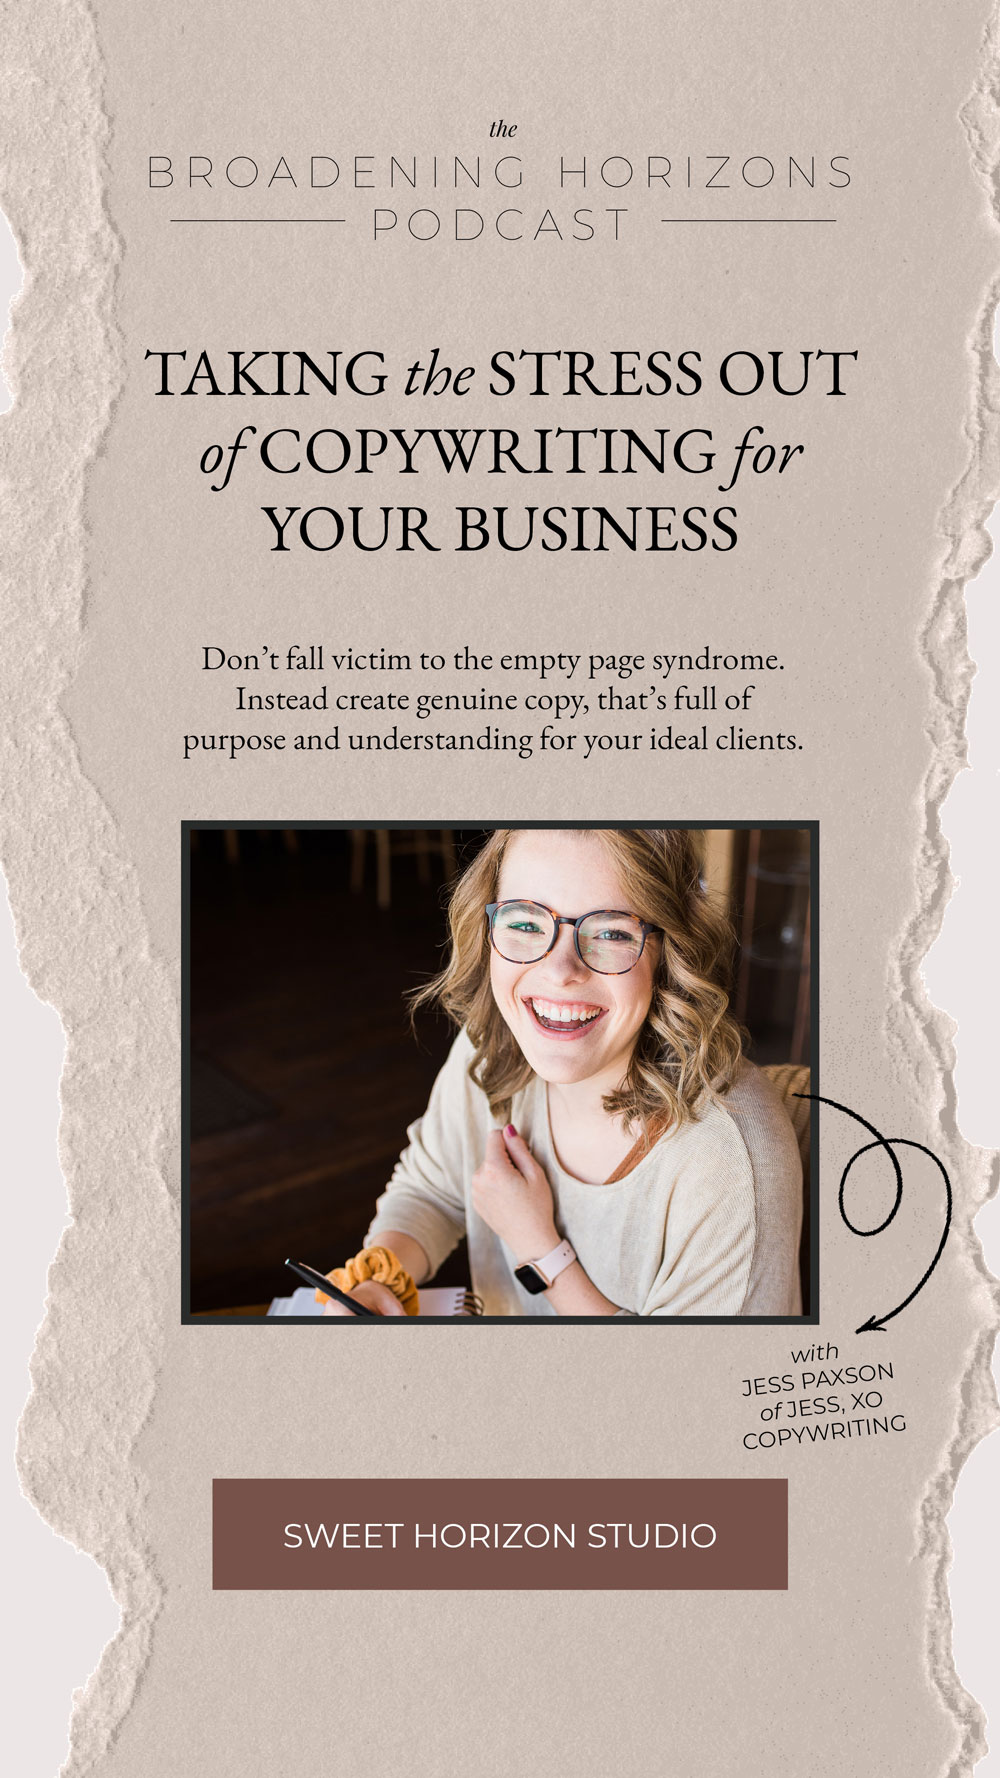 Taking the Stress Out of Copywriting for Your Business with Jess, XO Copywriting from www.sweethorizonblog.com